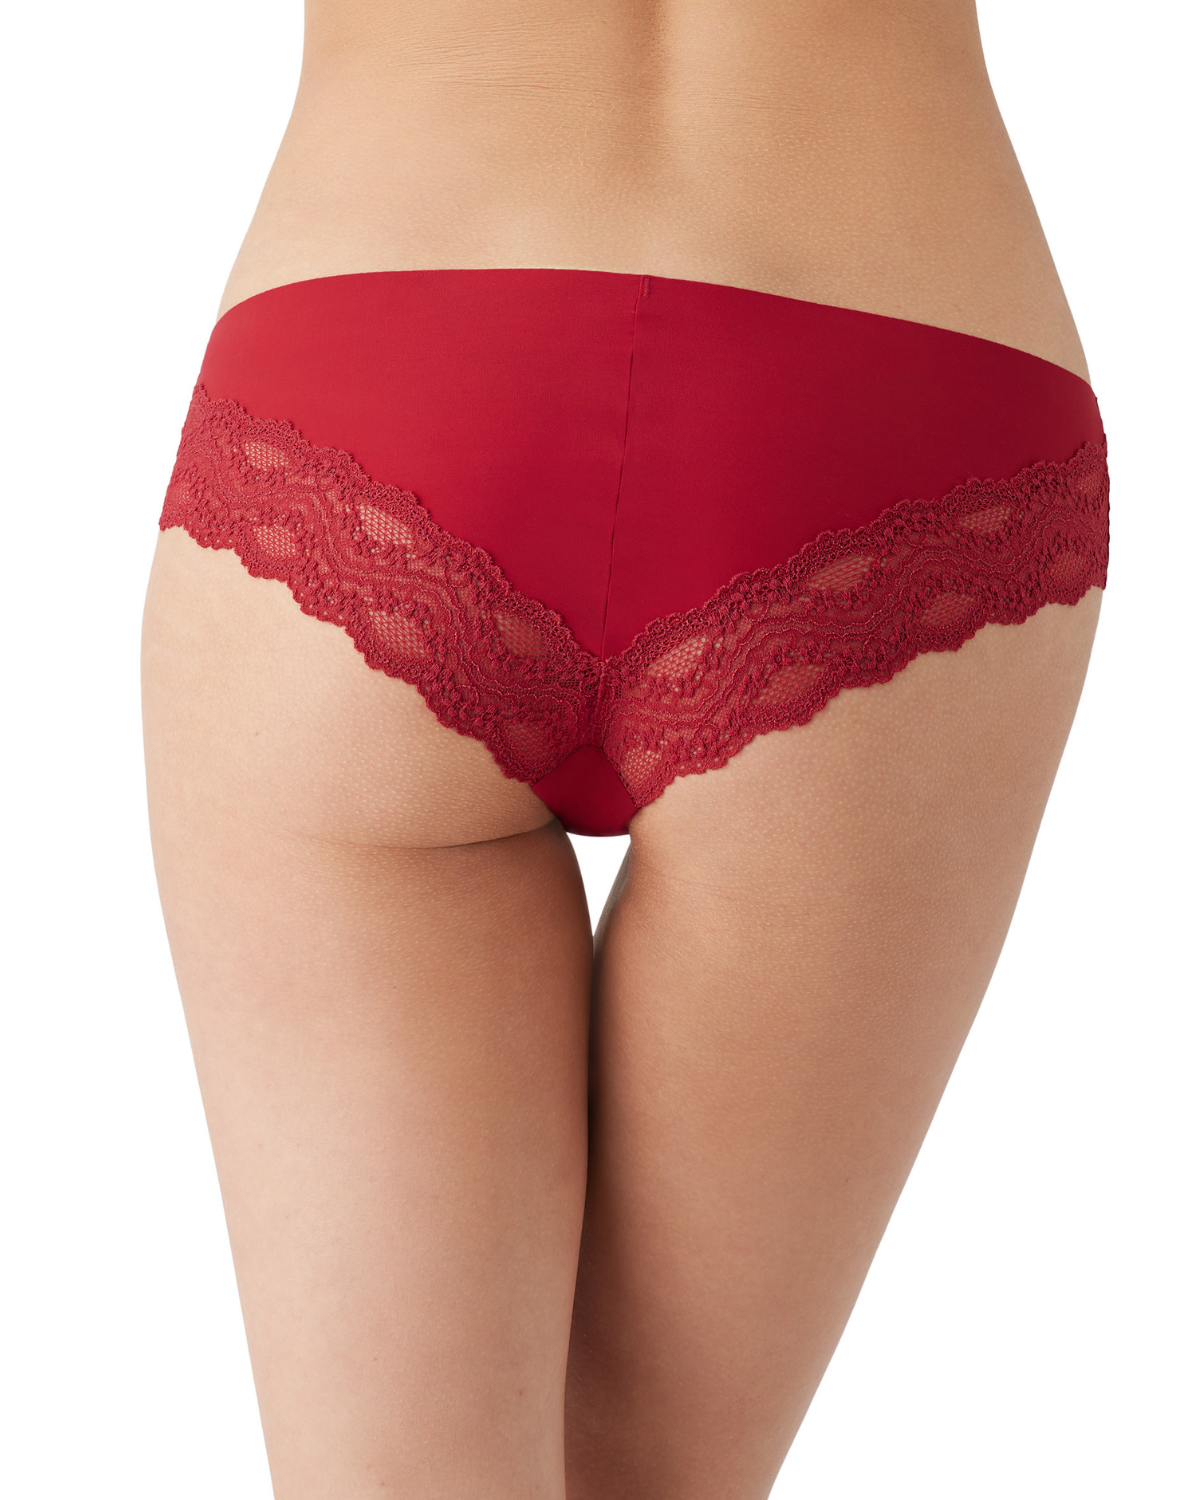 Women's red seamless hipster panty with  cheeky lace back.